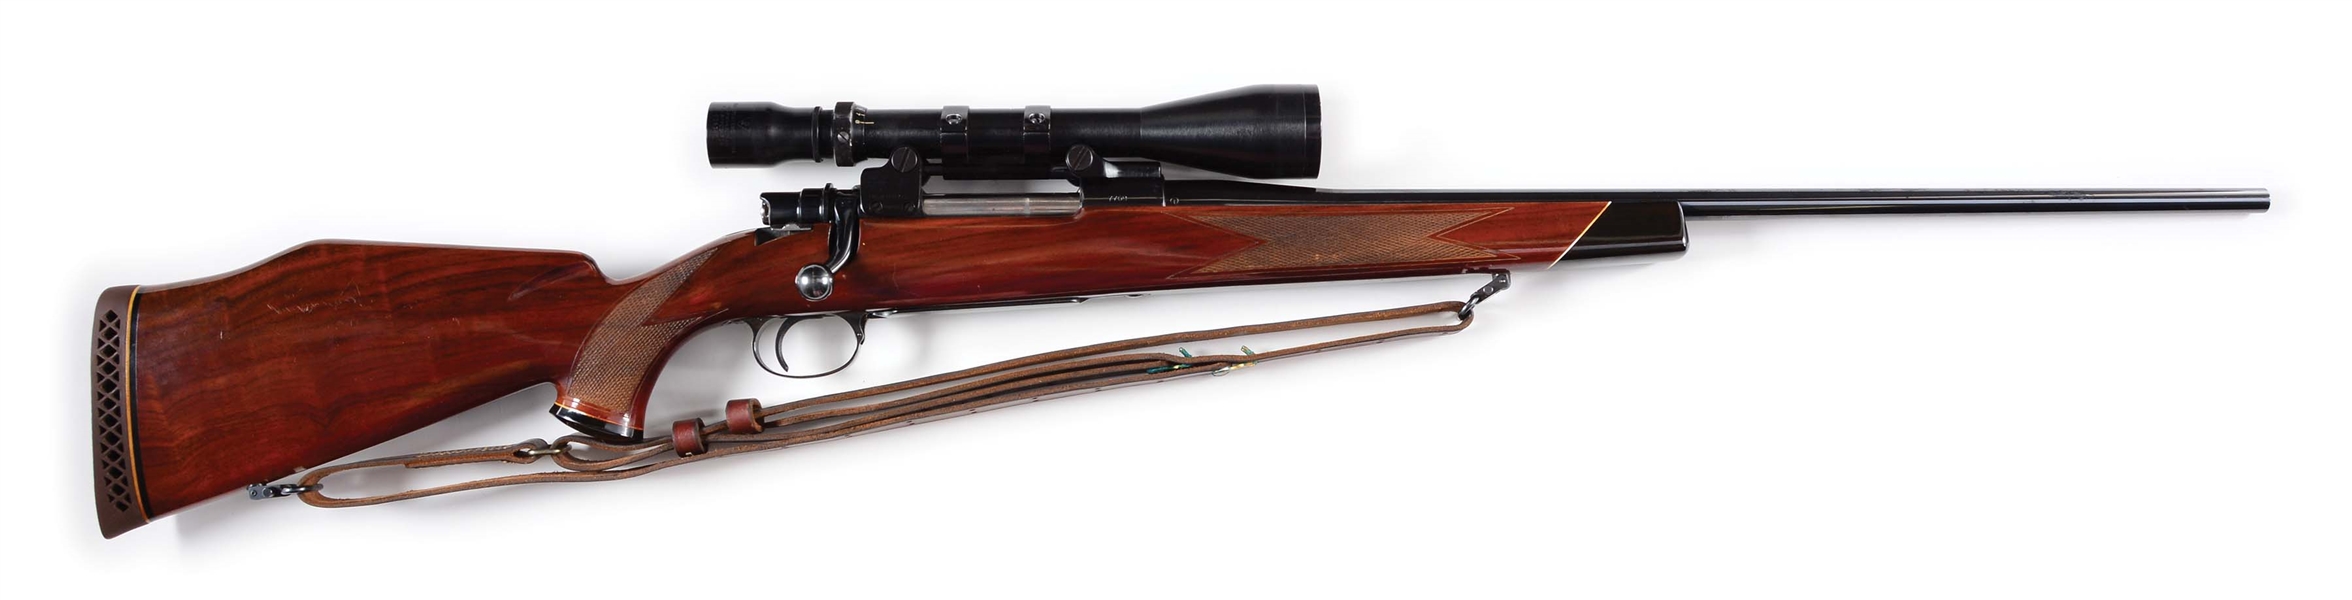 (C) EARLY WEATHERBY-FN SOUTHGATE BOLT ACTION RIFLE WITH SCOPE.